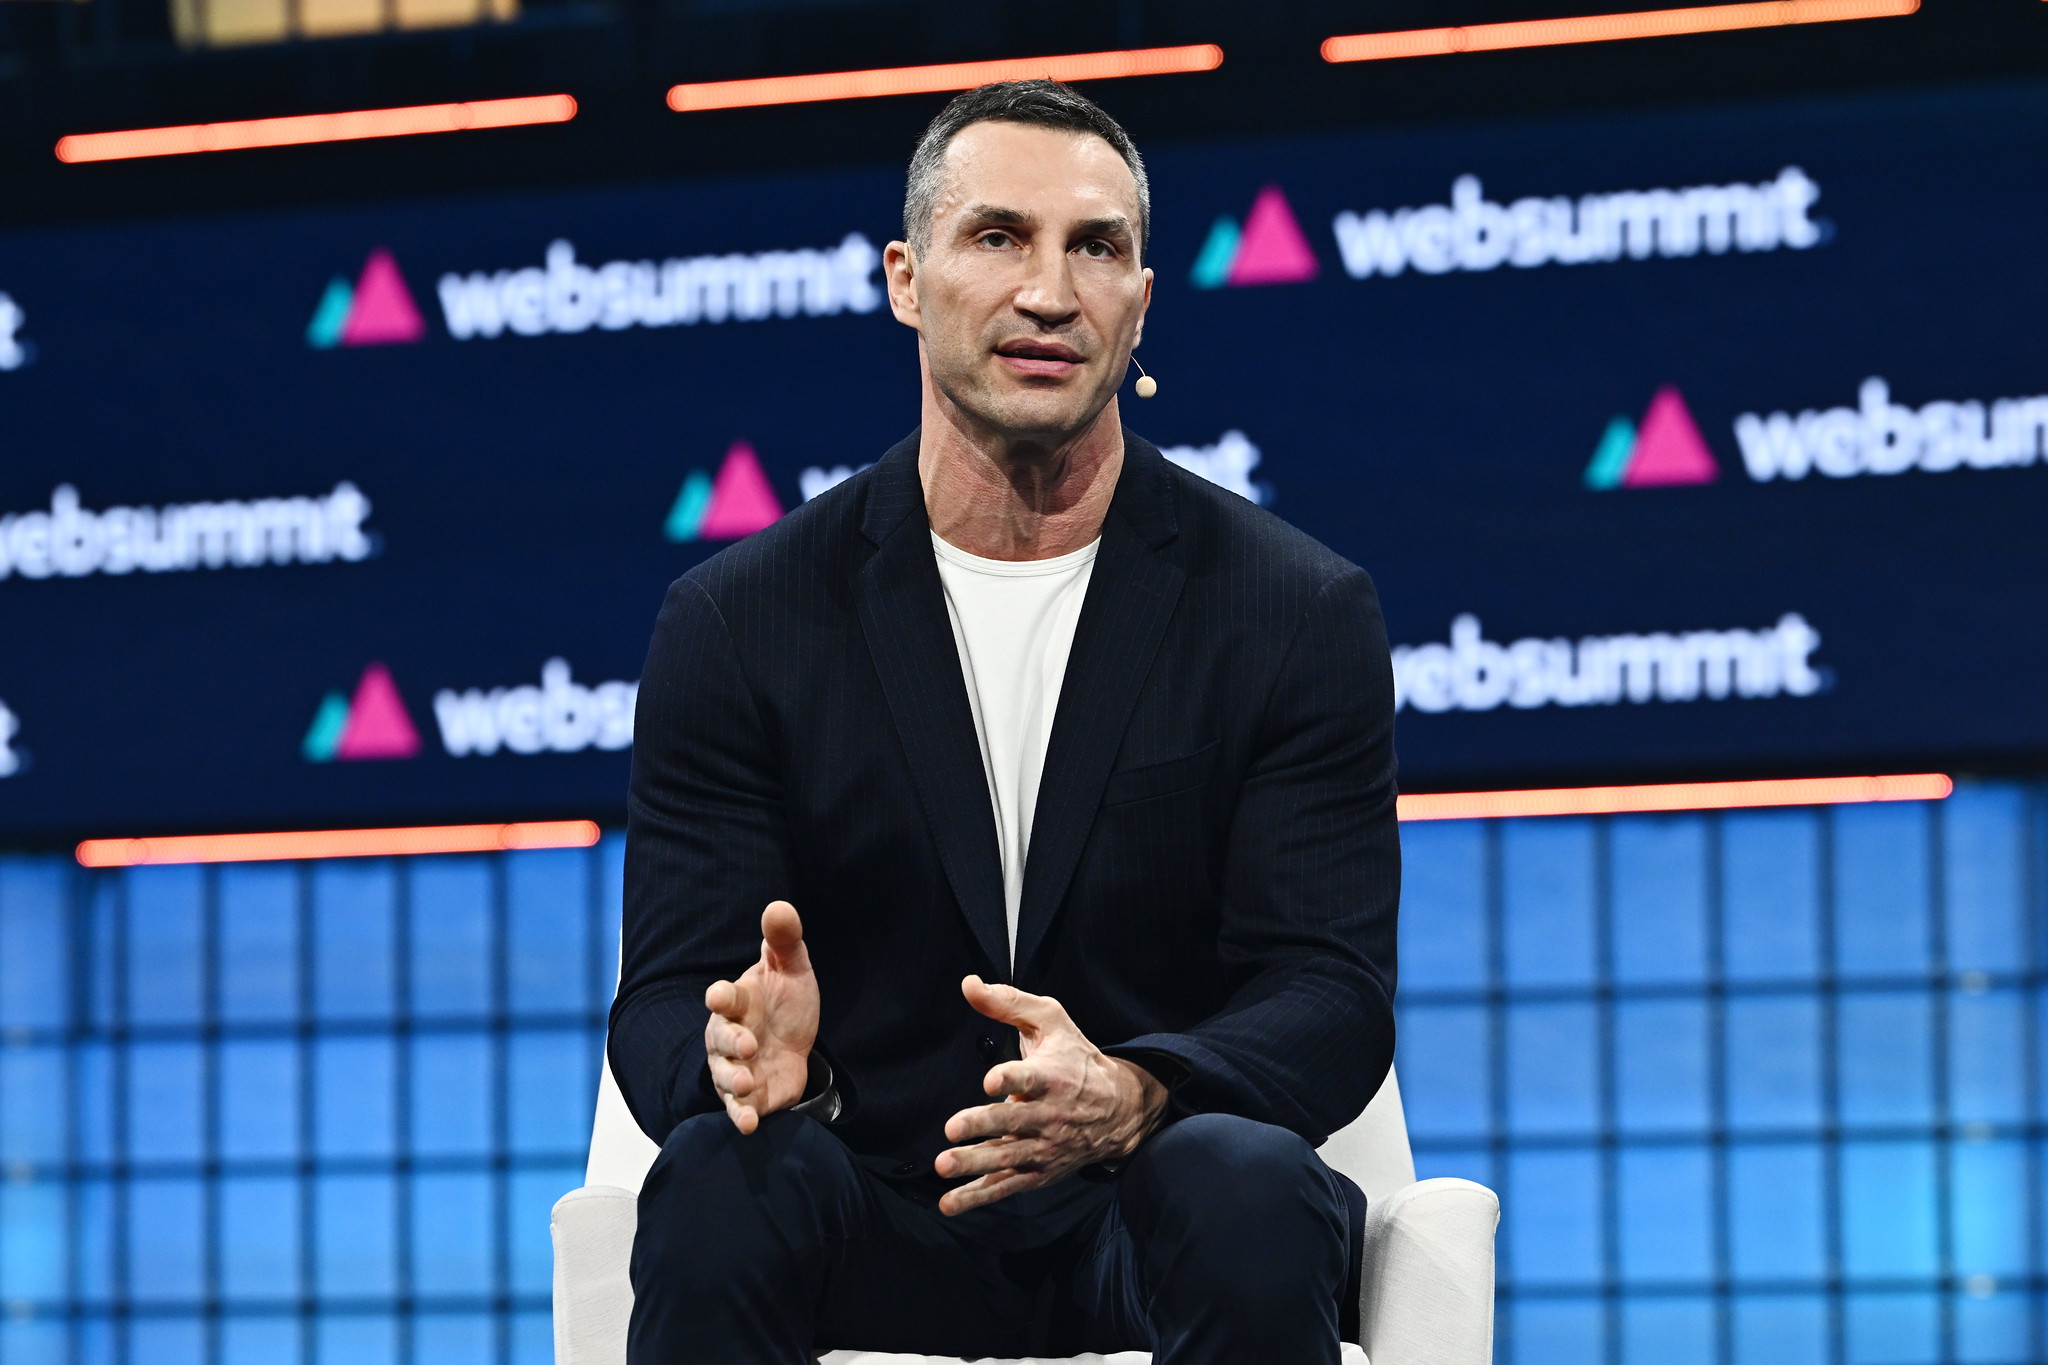 Wladimir Klitschko, Ambassador of Kyiv Digital, founder Klitschko Foundation, Klitschko Ventures, Kliwla Family Office, on Centre Stage during day one of Web Summit 2023 at the Altice Arena in Lisbon, Portugal